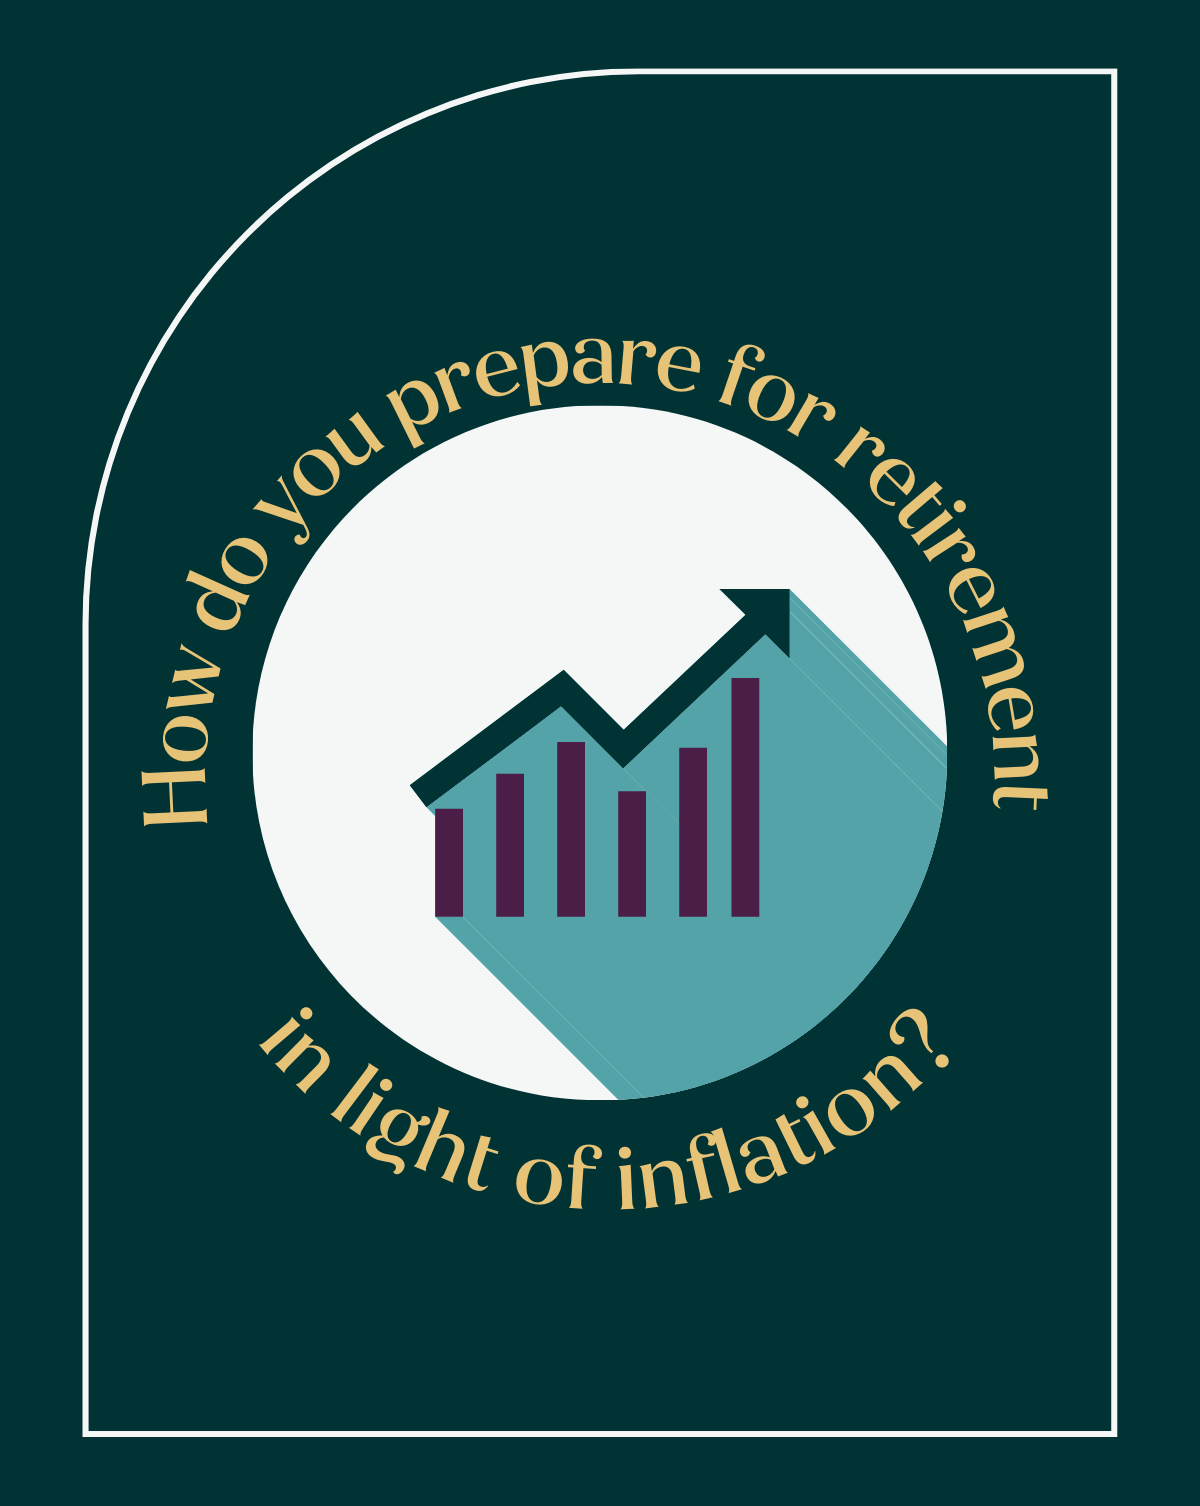 How do you preare for retirement in light of inflation?